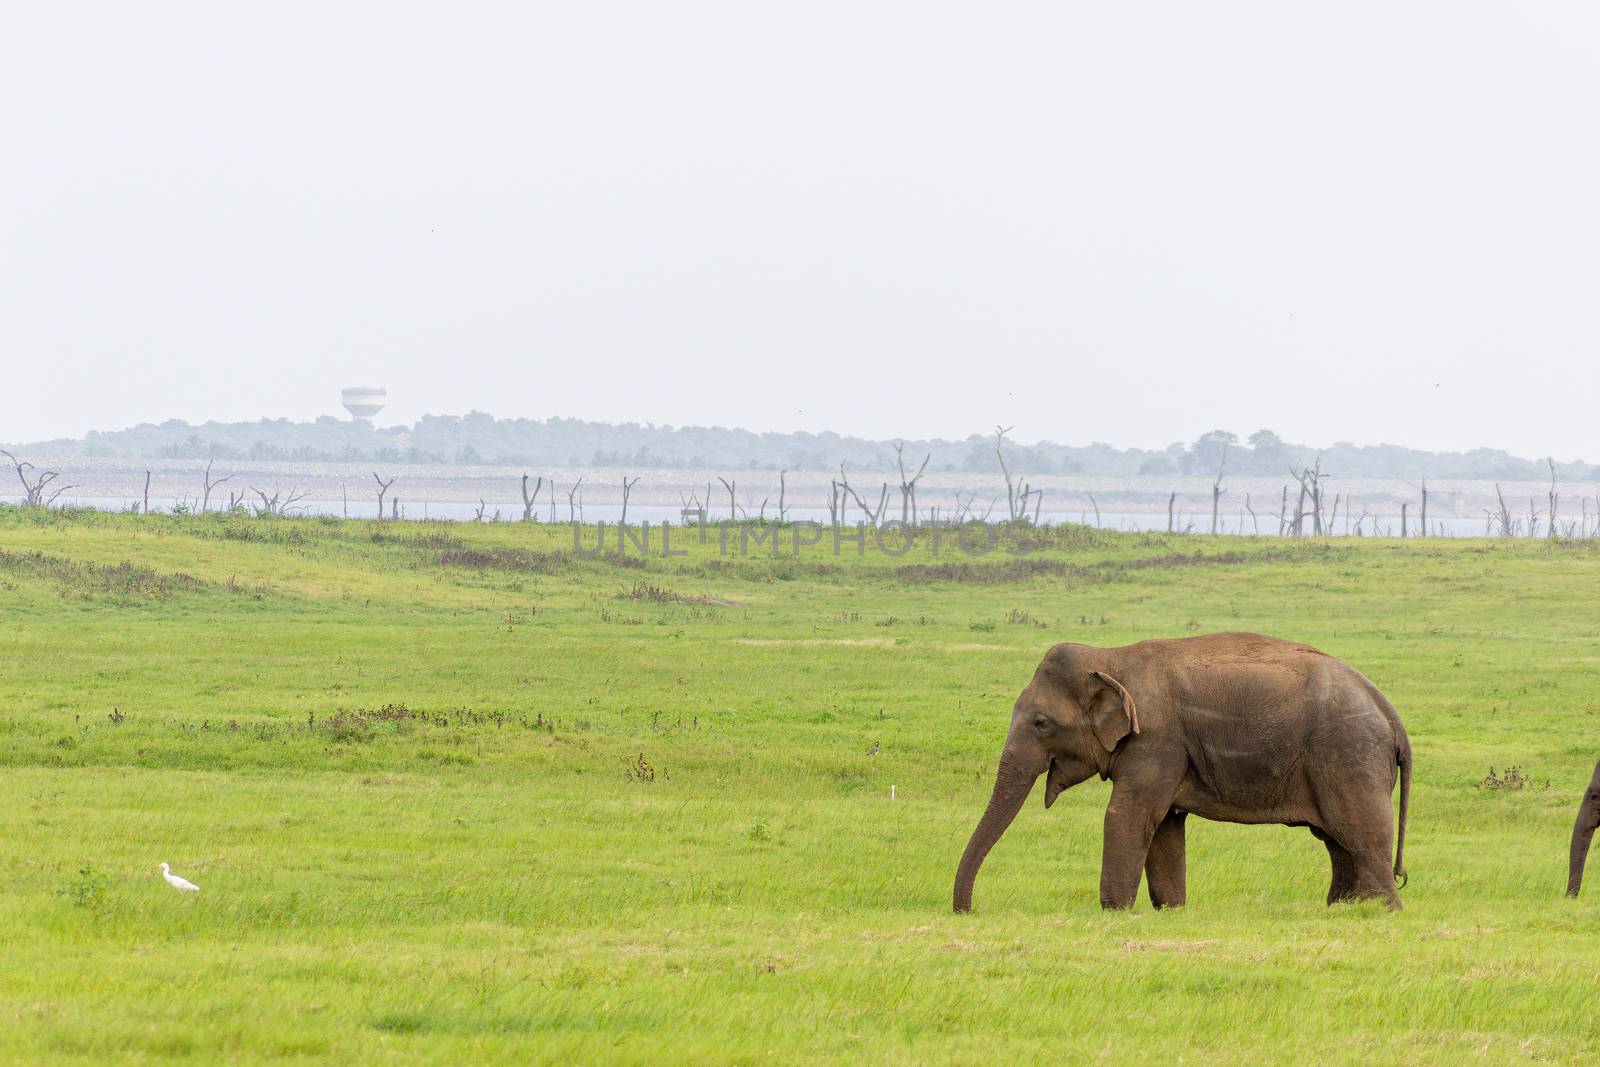 Baby elephant and savanna birds on a green field relaxing. Concept of animal care, travel and wildlife observation.